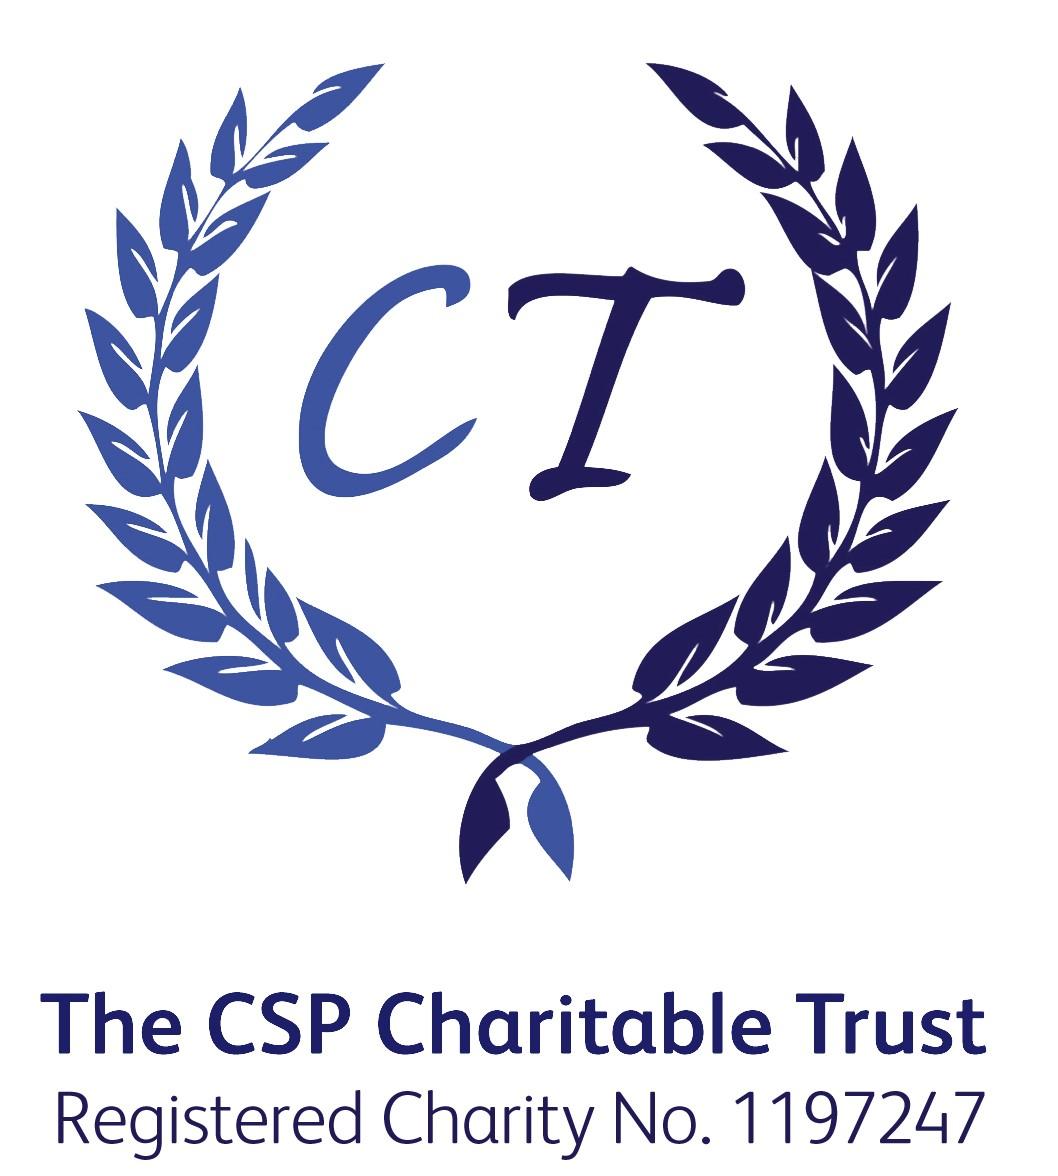 The CSP Charitable Trust is a registered charity